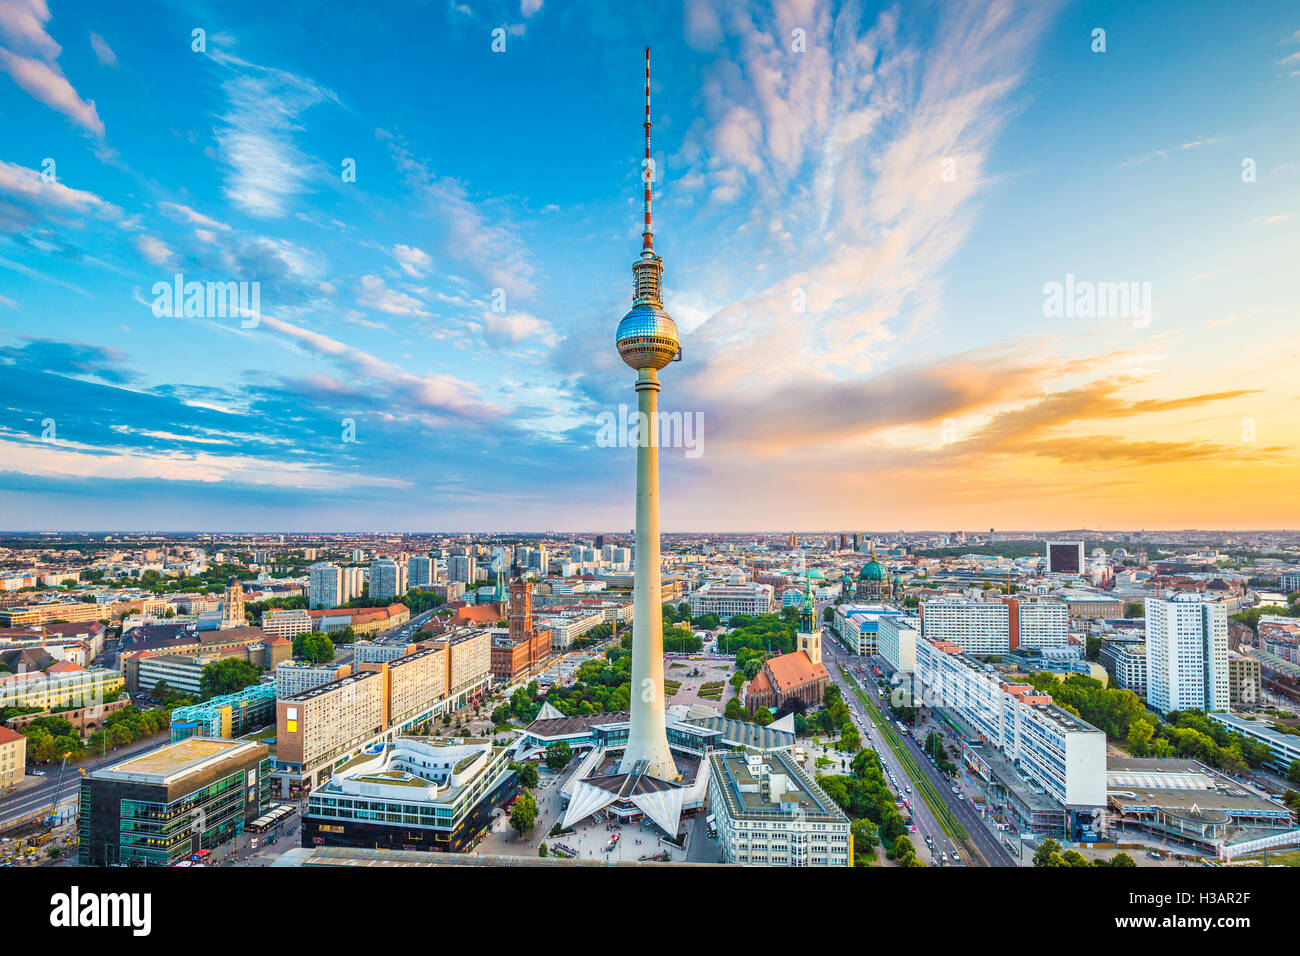 Berlin skyline panorama with famous TV tower at Alexanderplatz and dramatic clouds at sunset, Germany Stock Photo